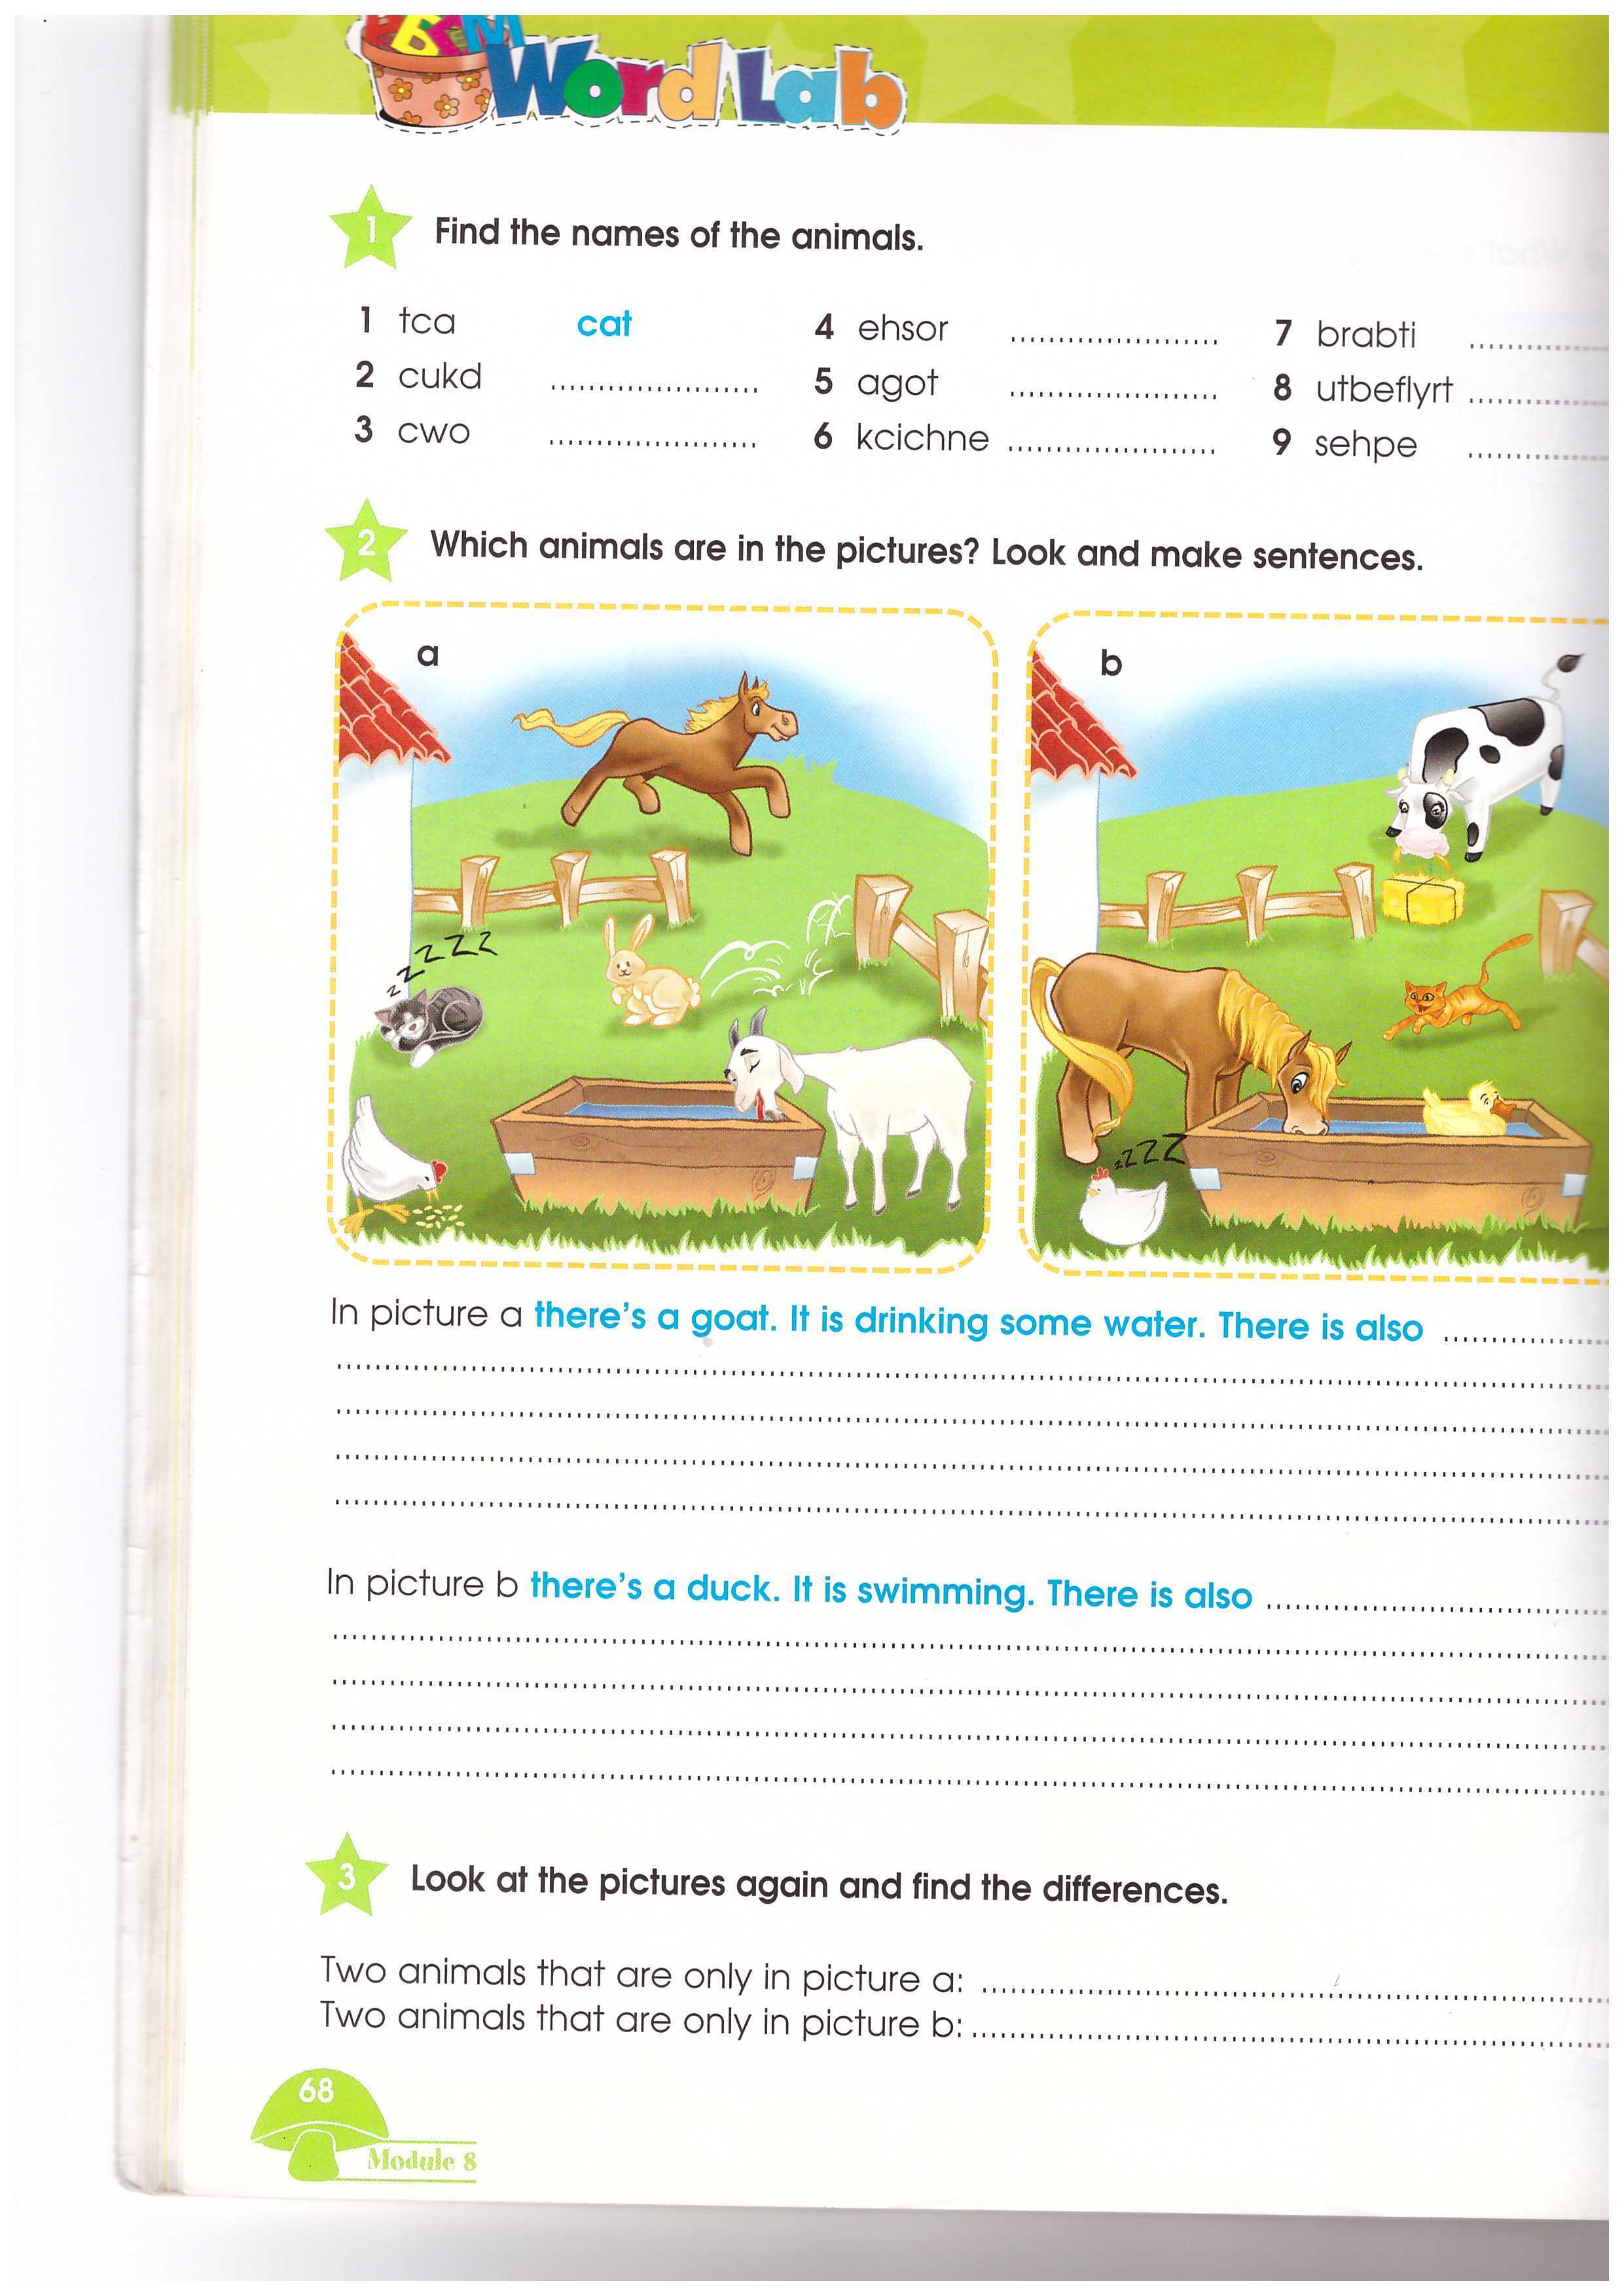 Starlight 3 animals. English Starlight 3 класс are there. Starlight 2 Worksheets. Find the differences and make sentences ответ. Starlight 1 Worksheets.